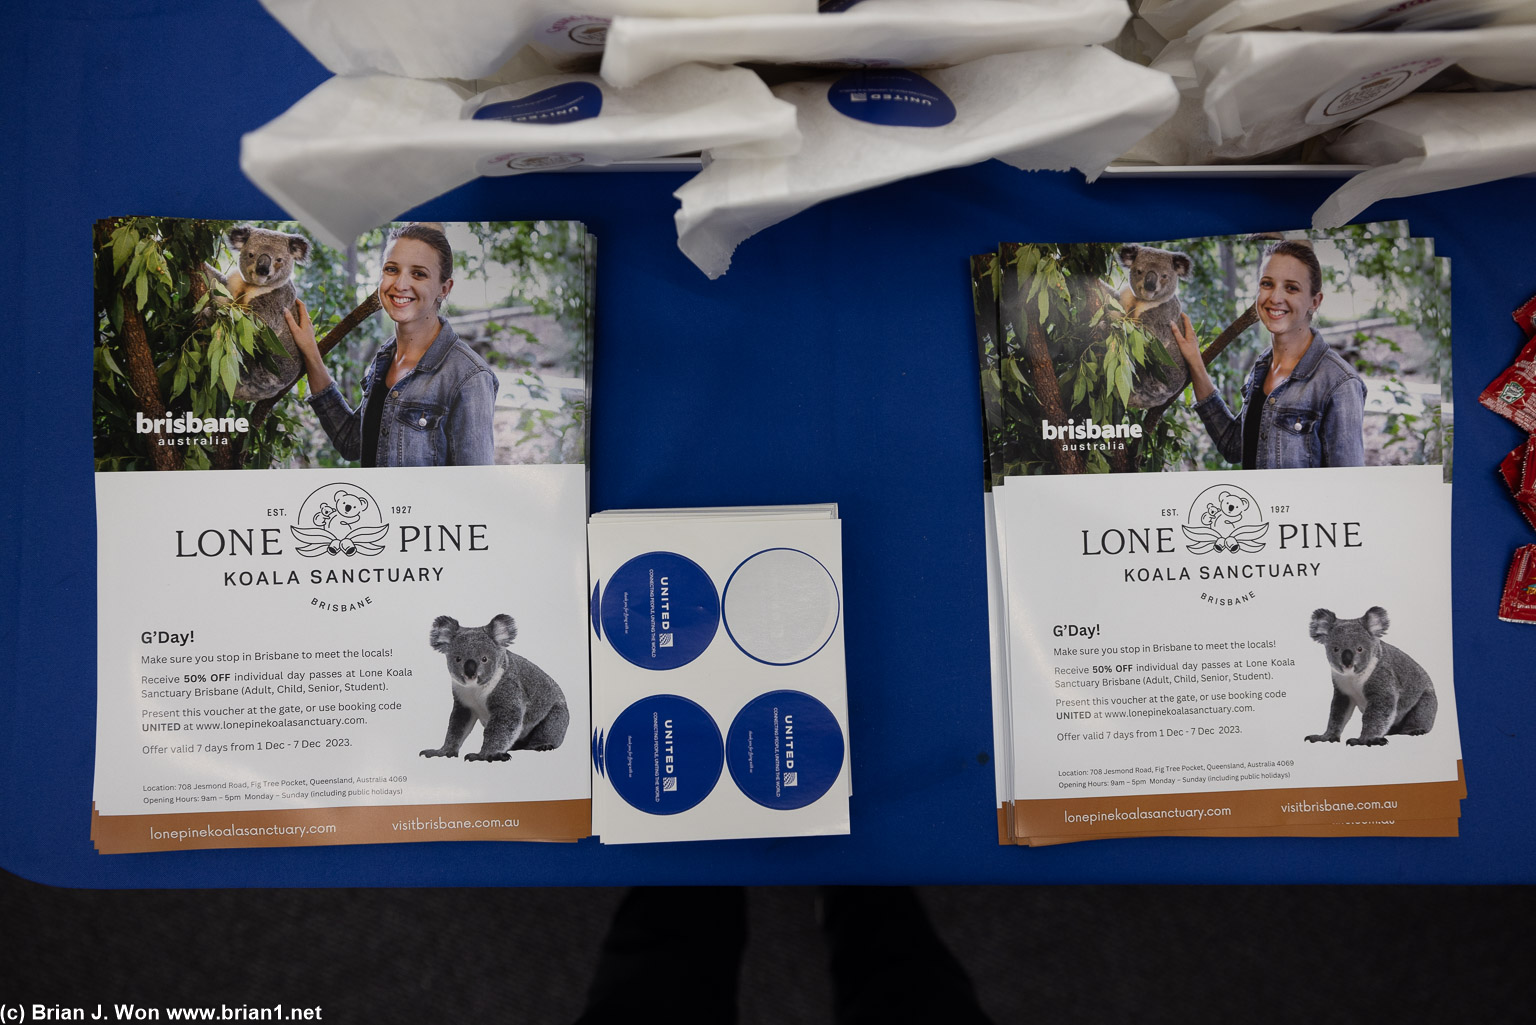 Lone Pine Koala Sanctuary being promoted, too.